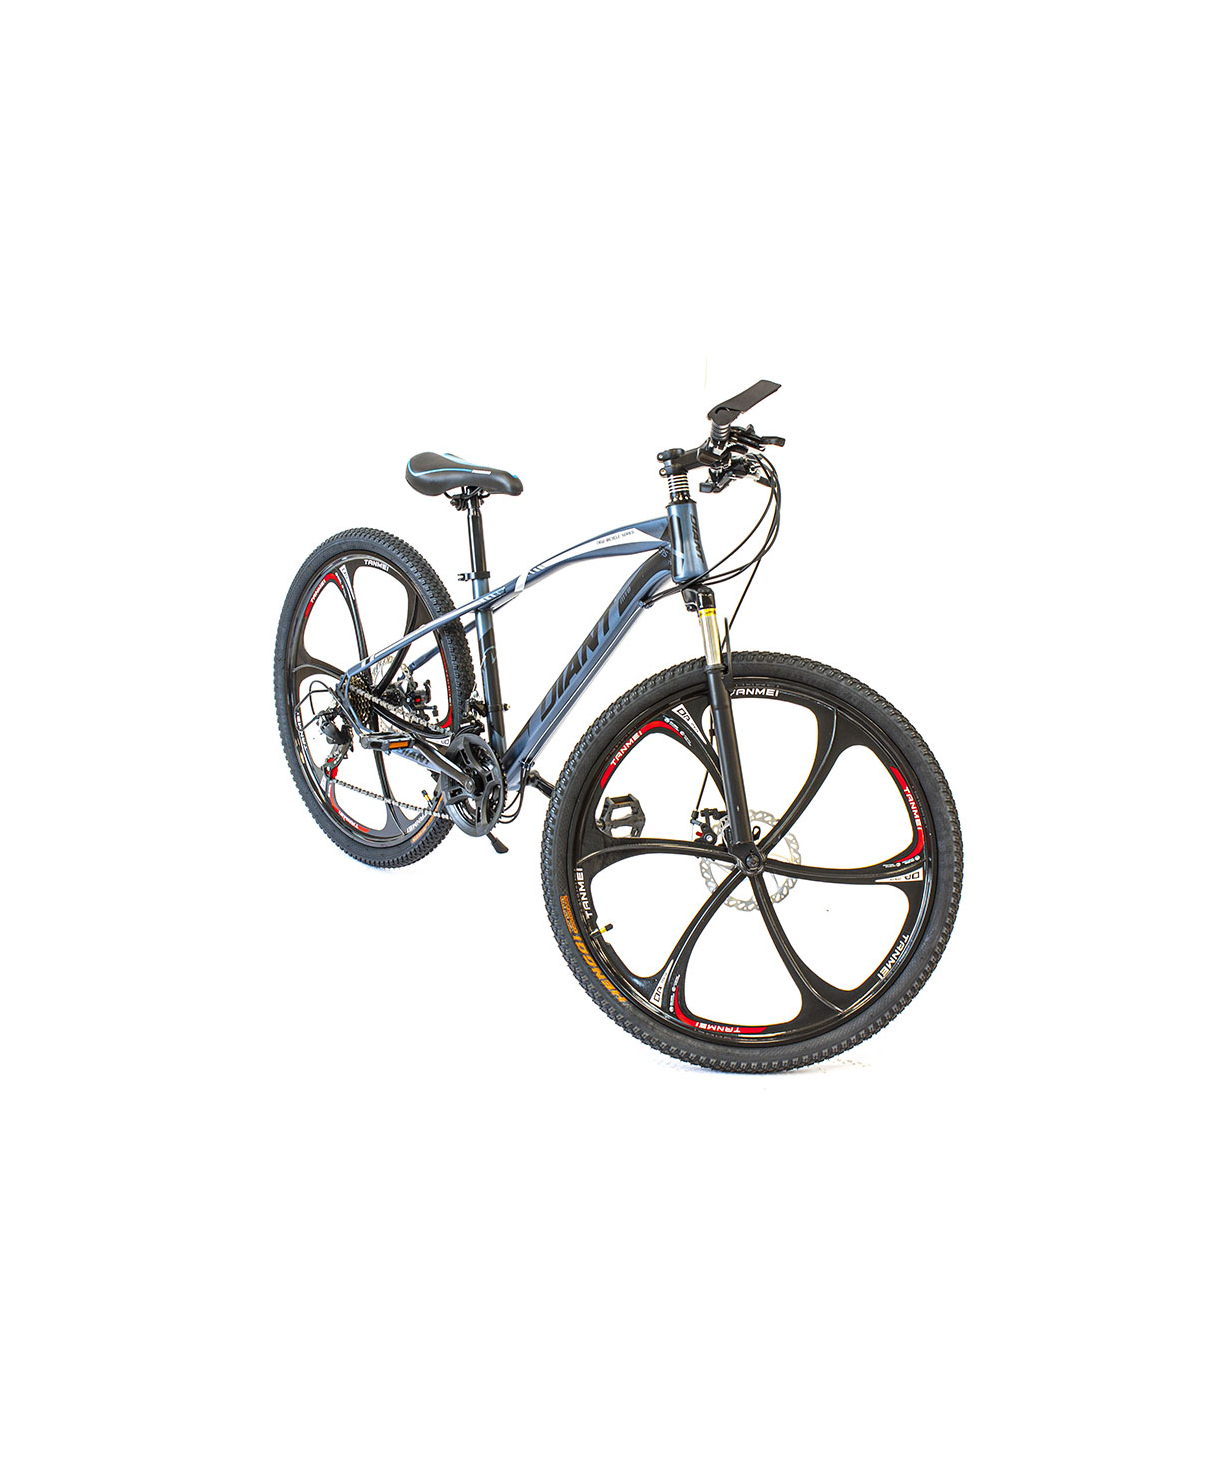 Bicycle Diant01 G15 26